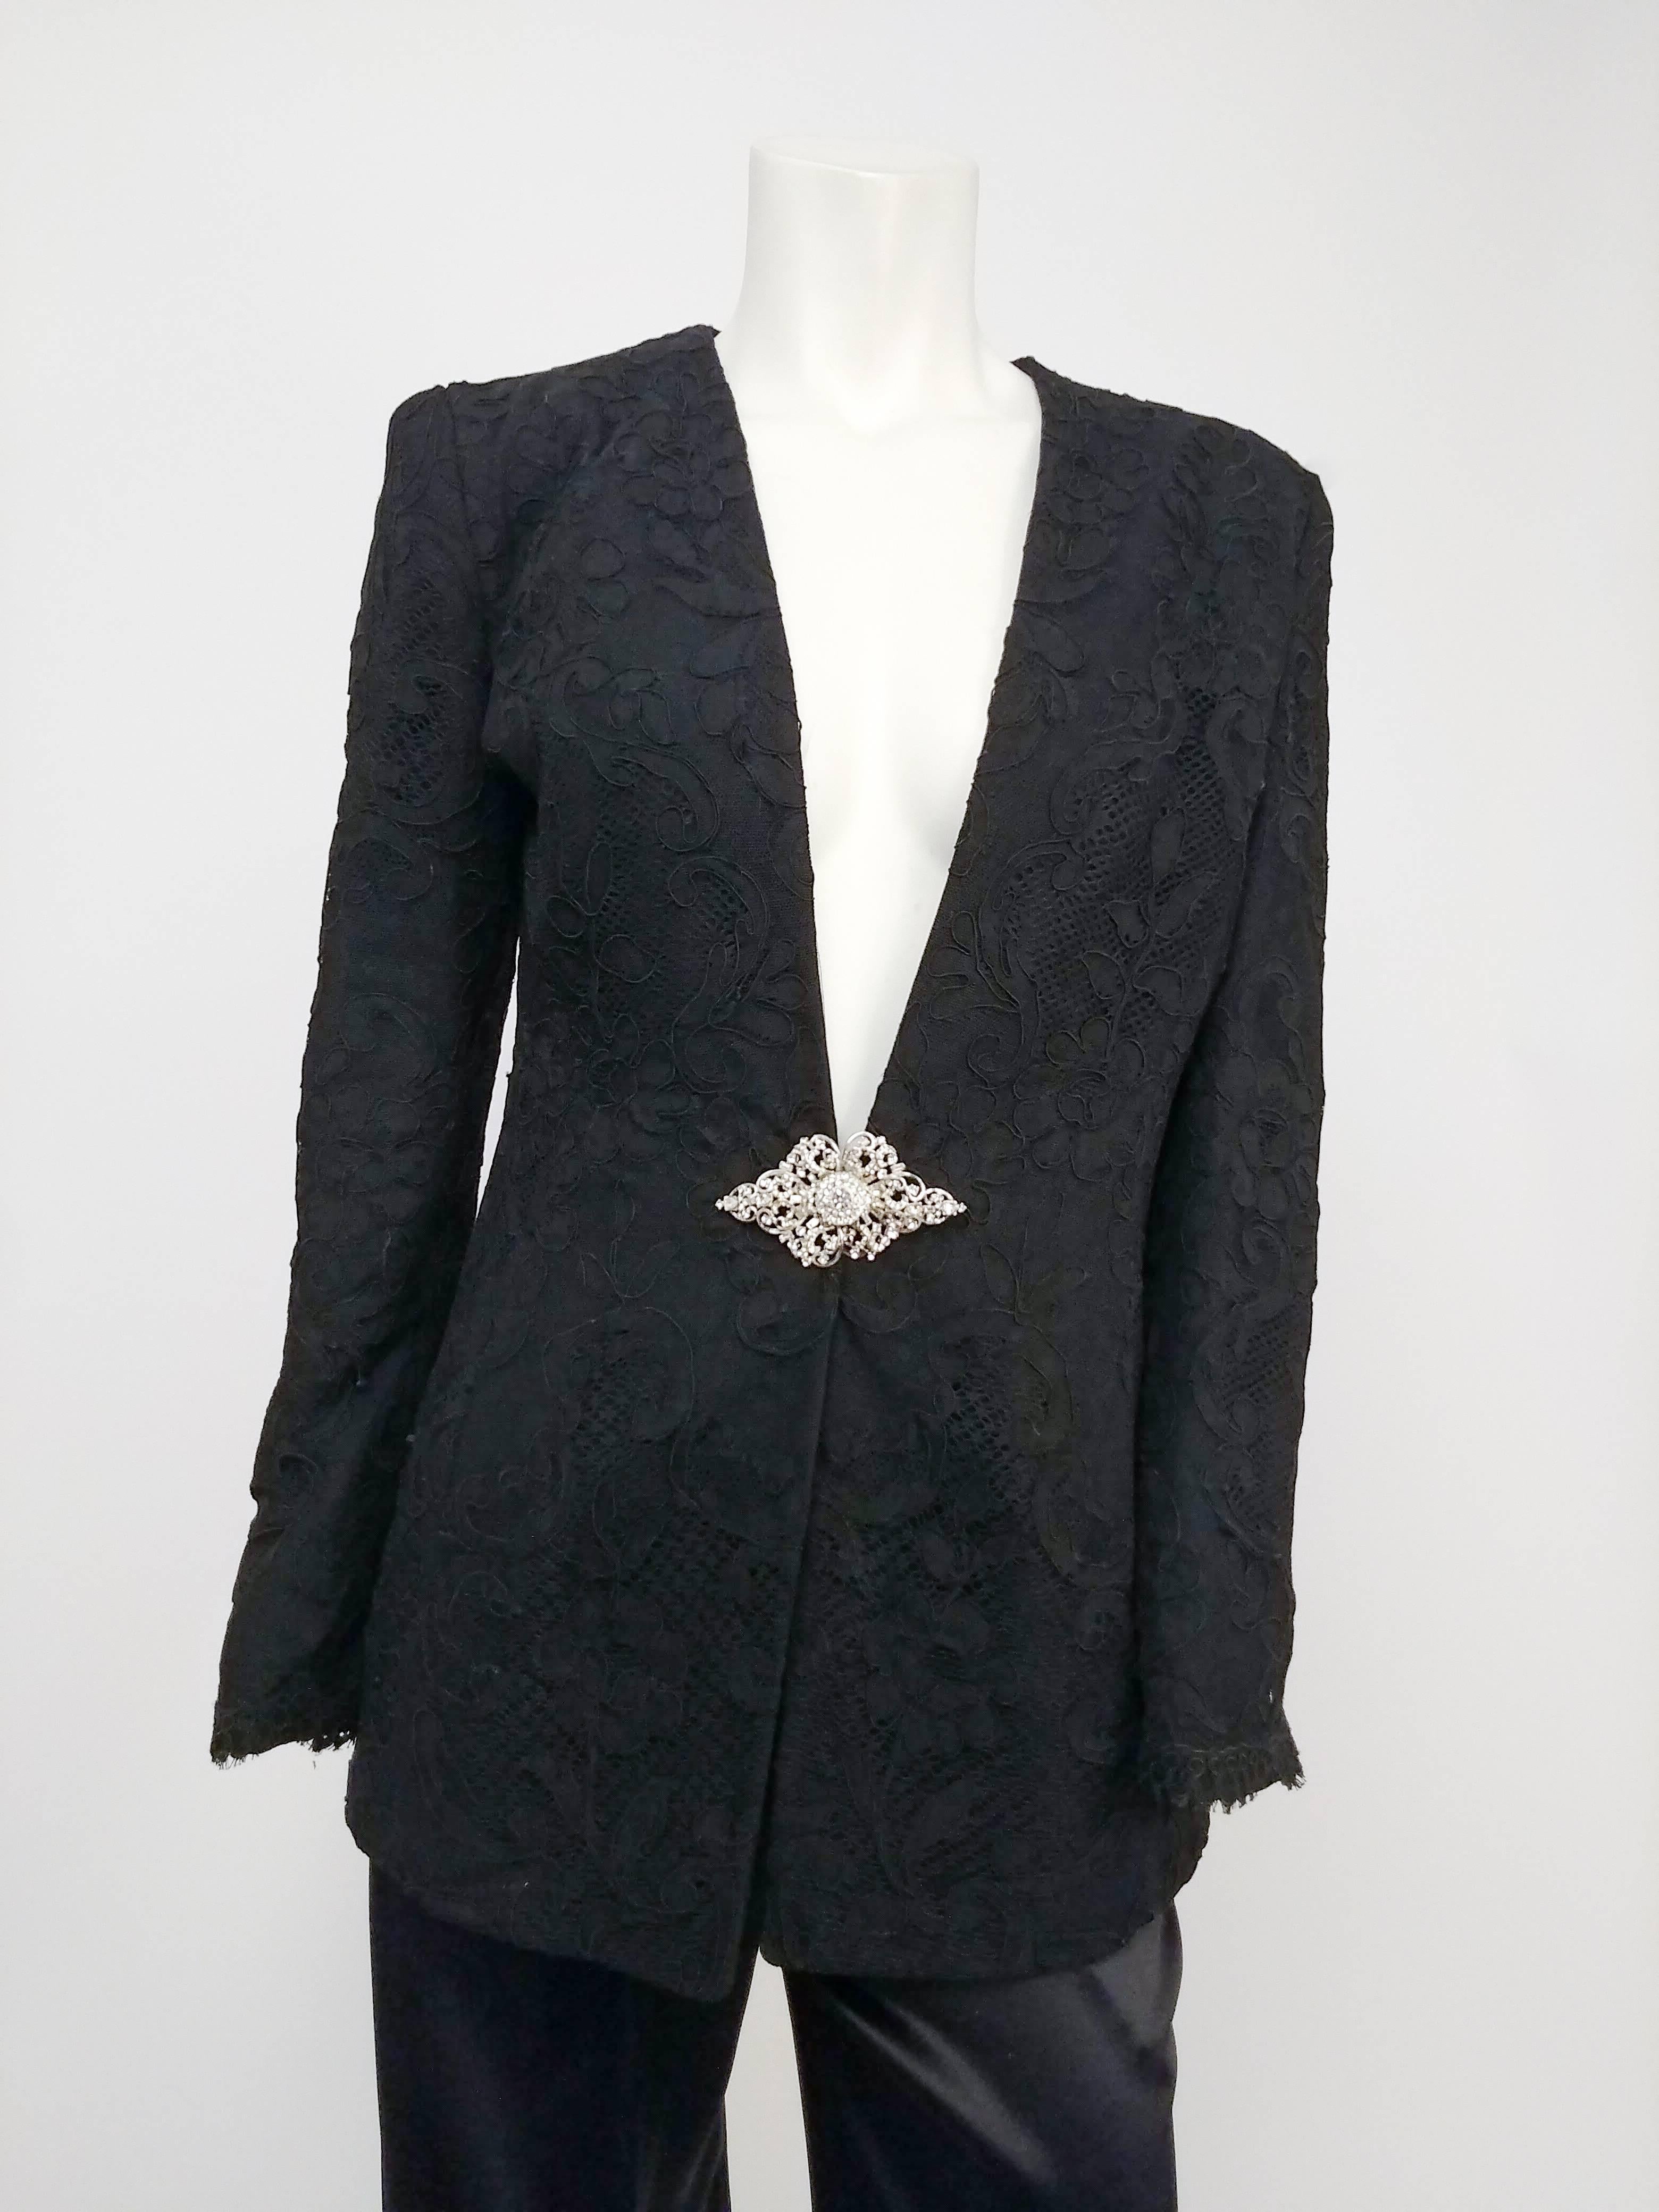 1980s Badgley Mischka Lace Blazer & Satin Trouser Pantsuit. Low cut collarless lace blazer fastens with rhinestone clasp at front. Padded shoulders. High waisted pleat front satin trousers. 